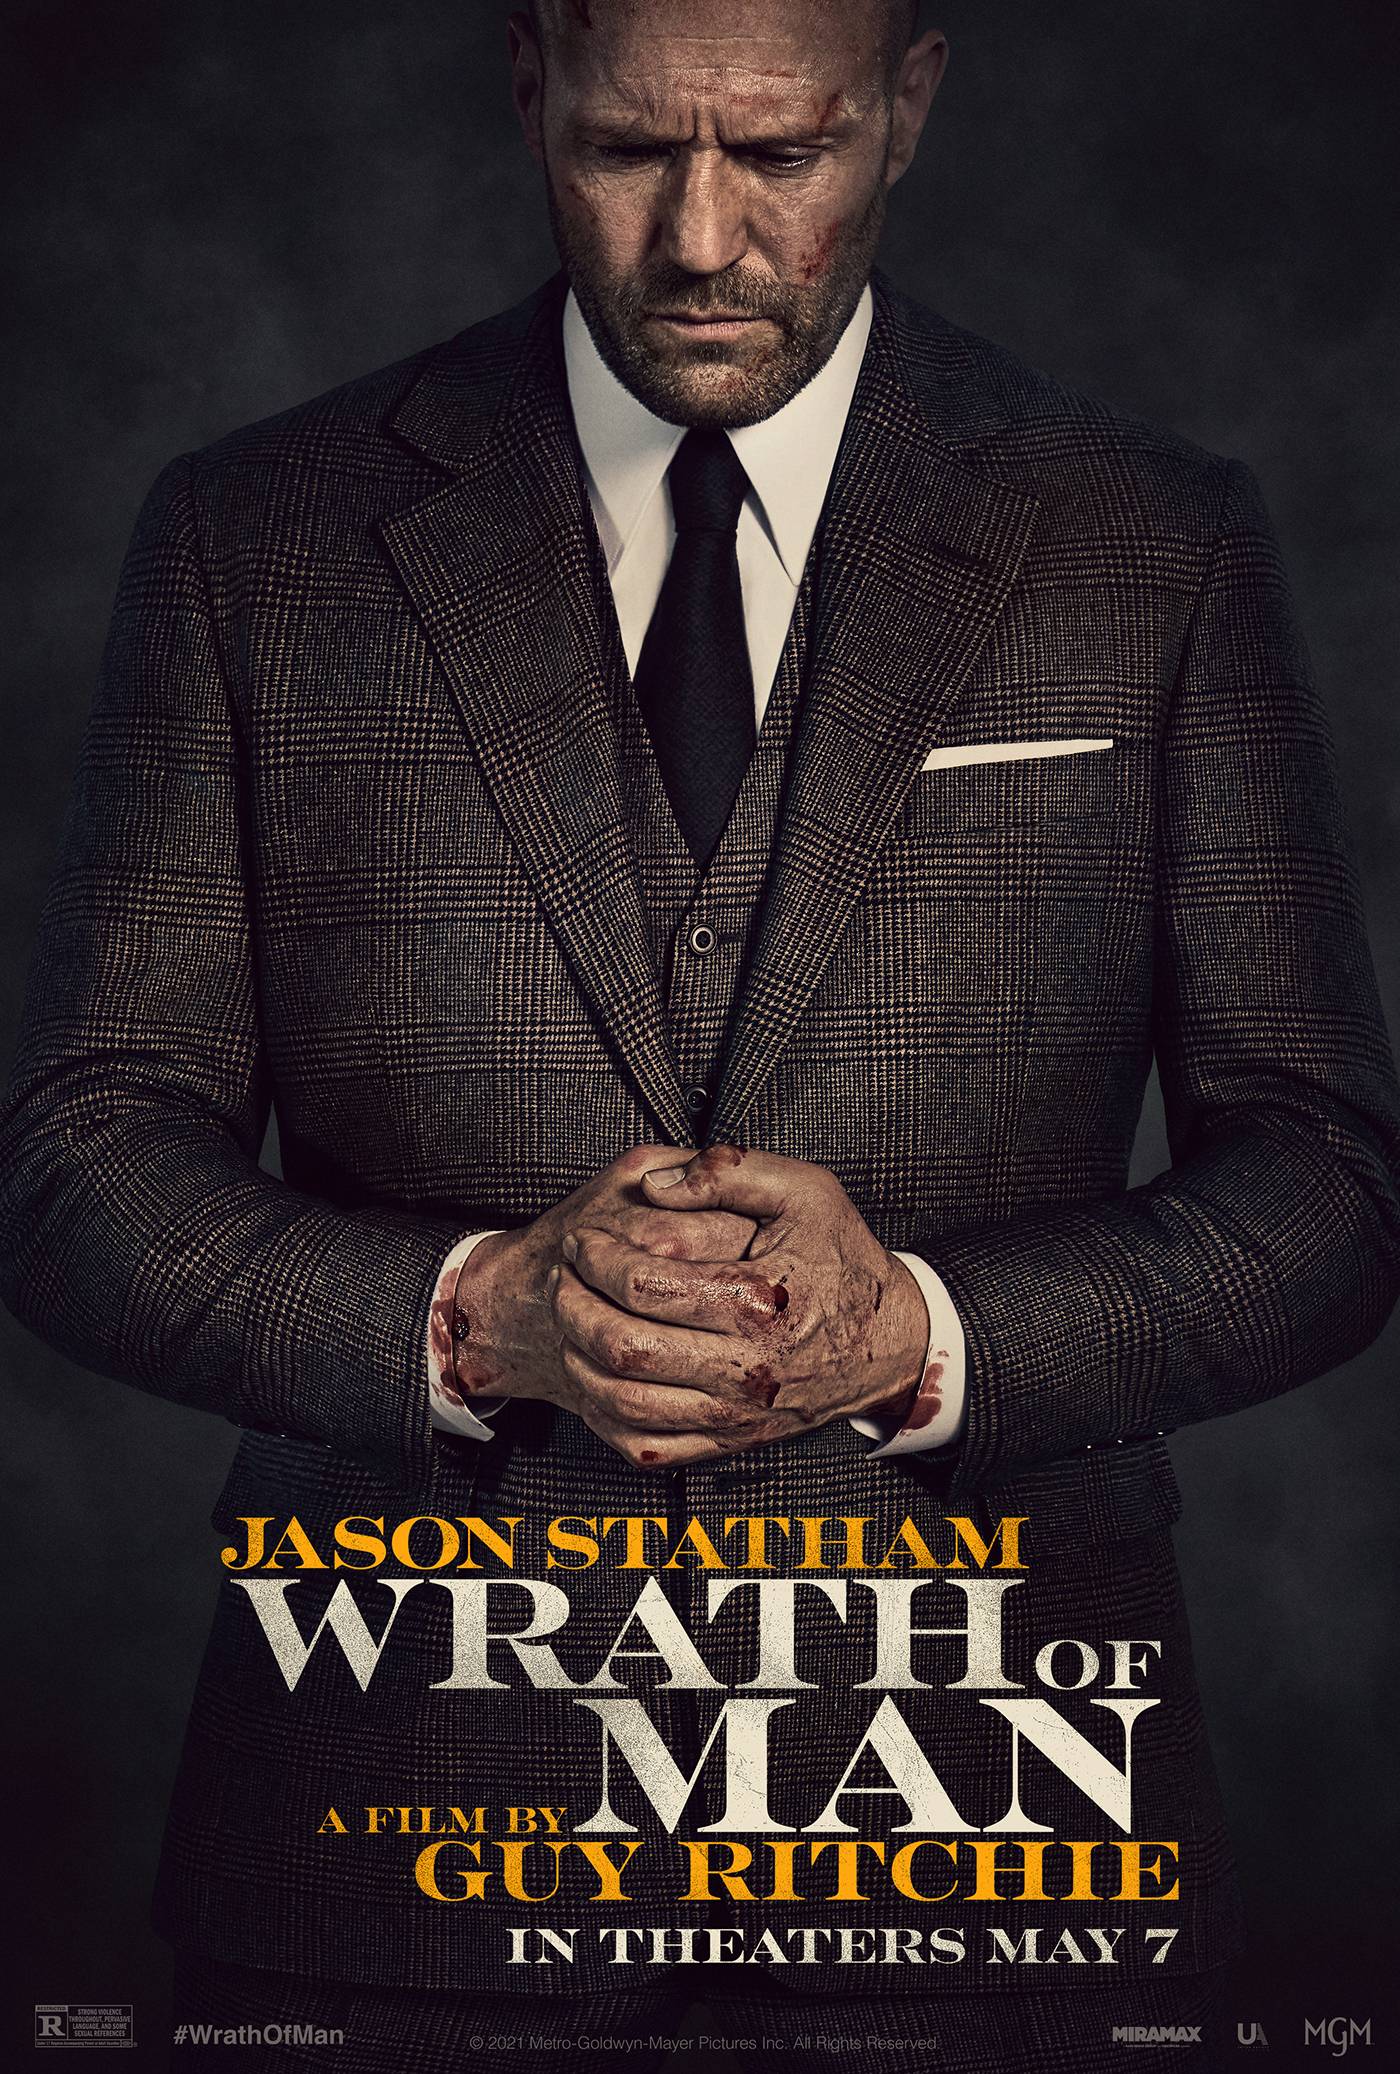 Wrath of Man: Poster and New Release Date for Guy Ritchie's New Jason Statham Movie